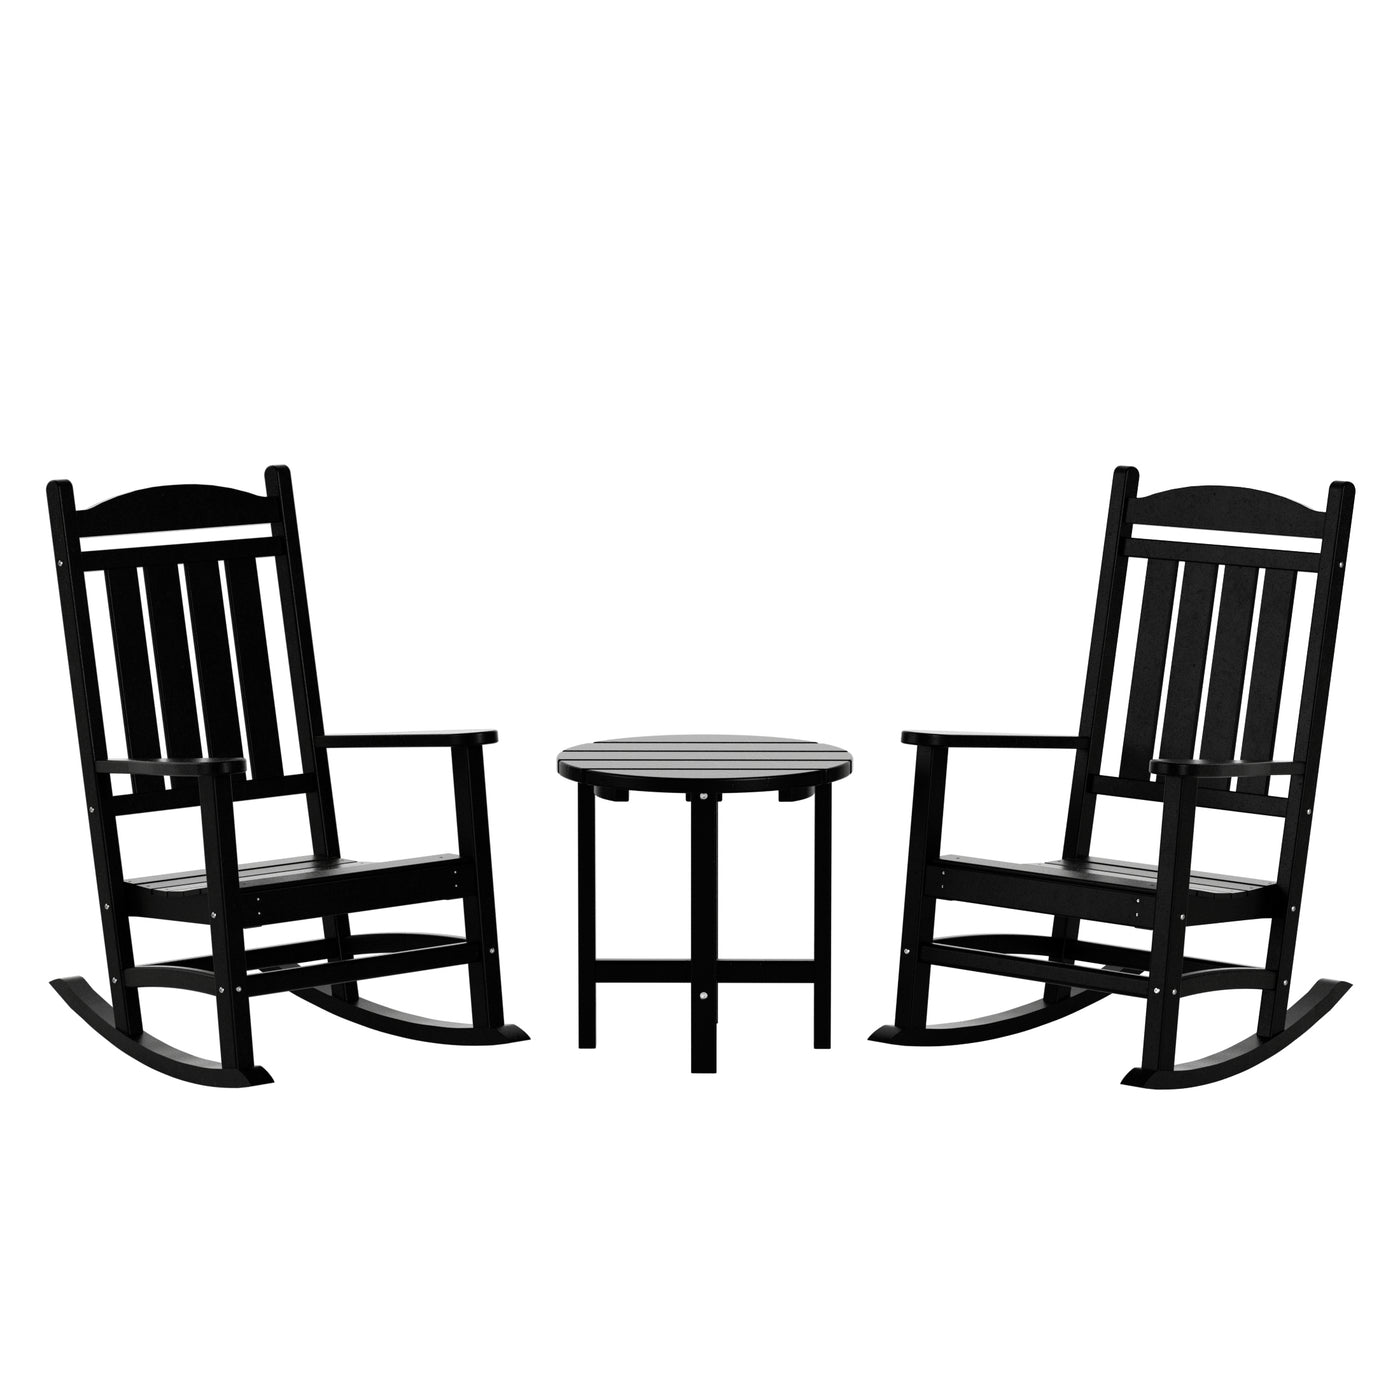 Malibu 3-Piece Outdoor Patio Porch Rocking Chair with Side Table Set